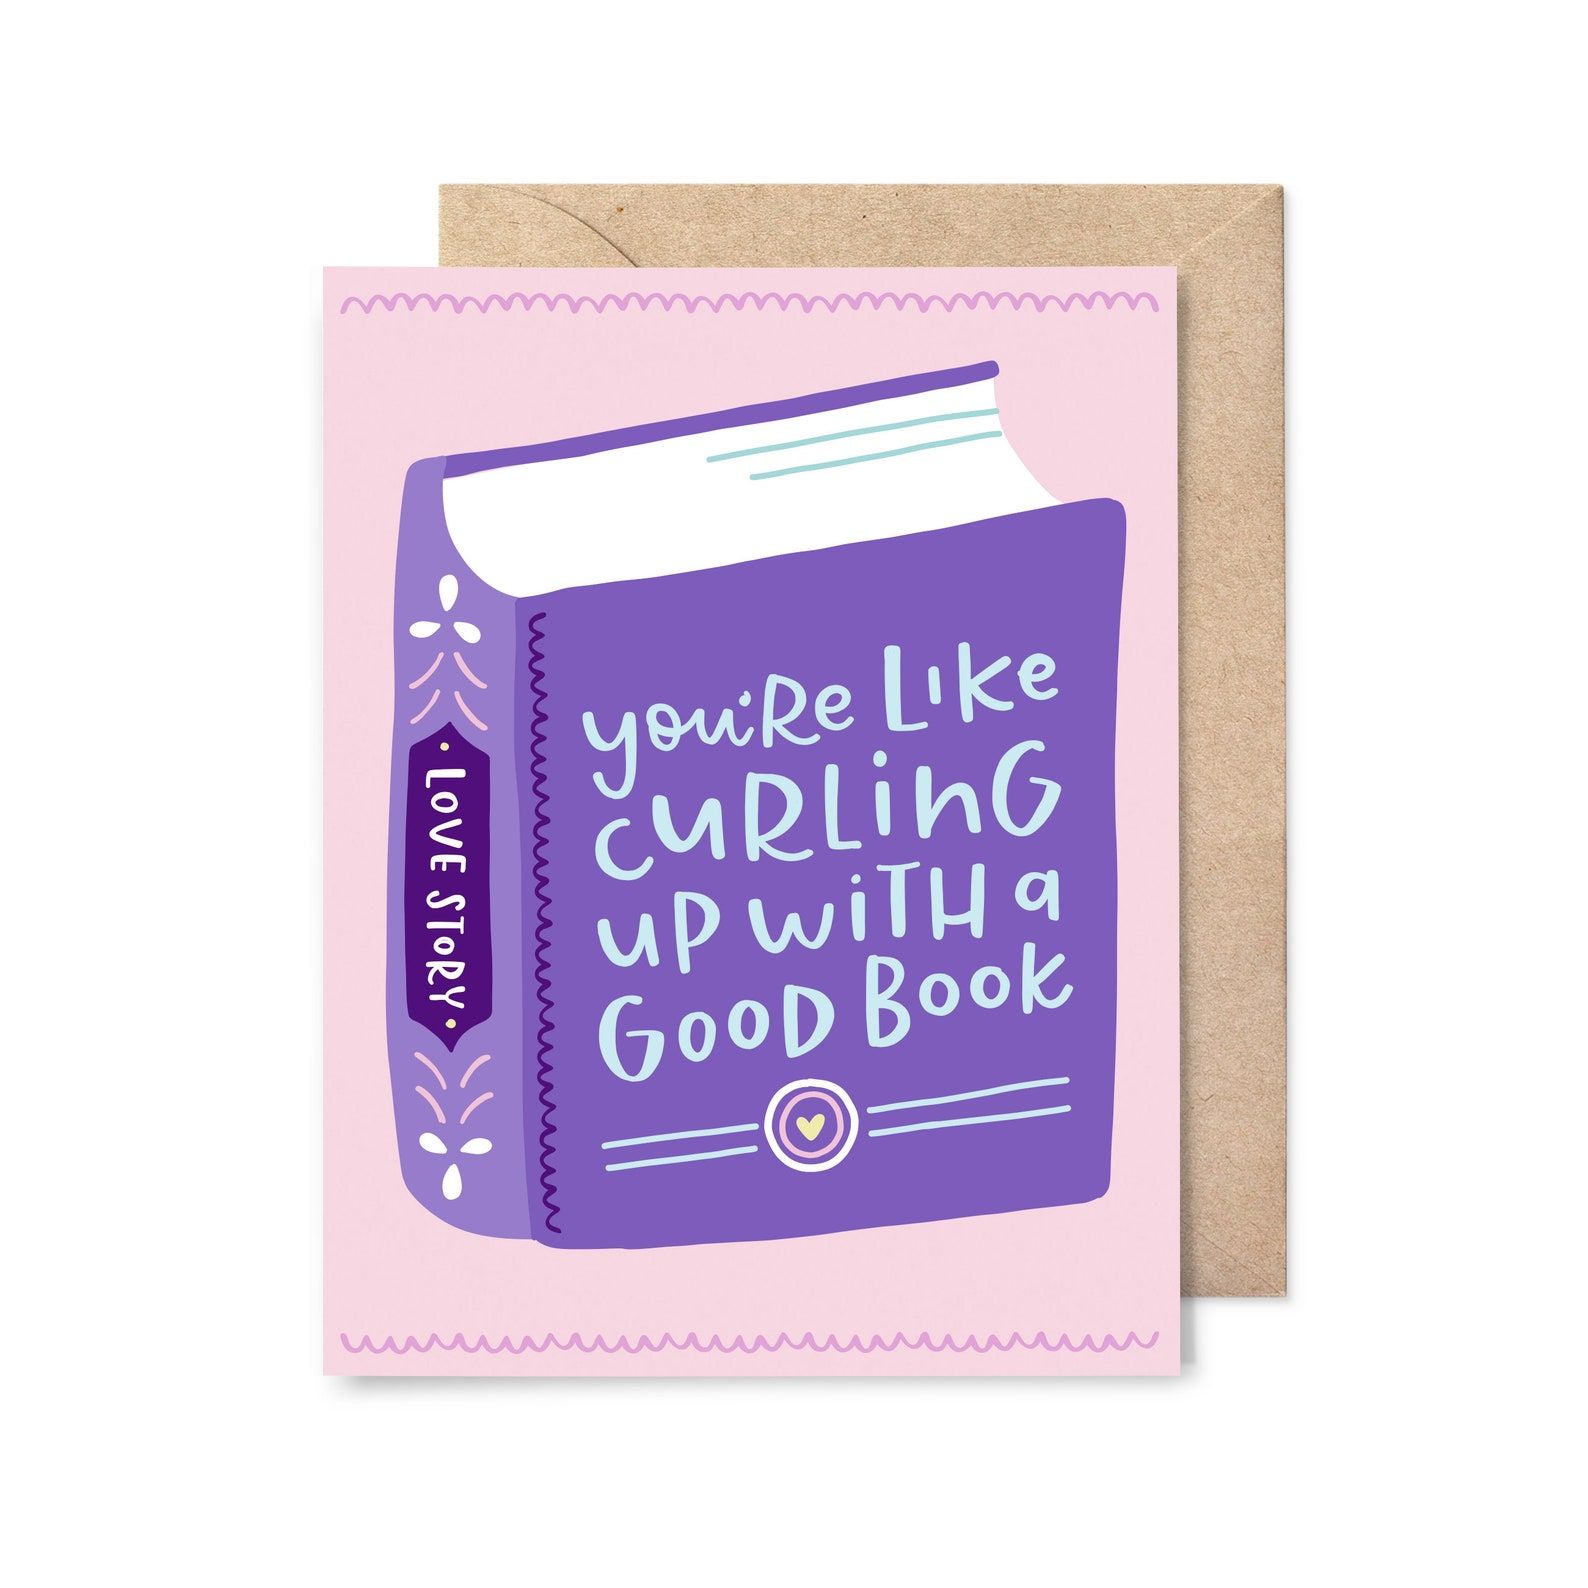 a purple book on a card that reads "You're like curling up with a good book"